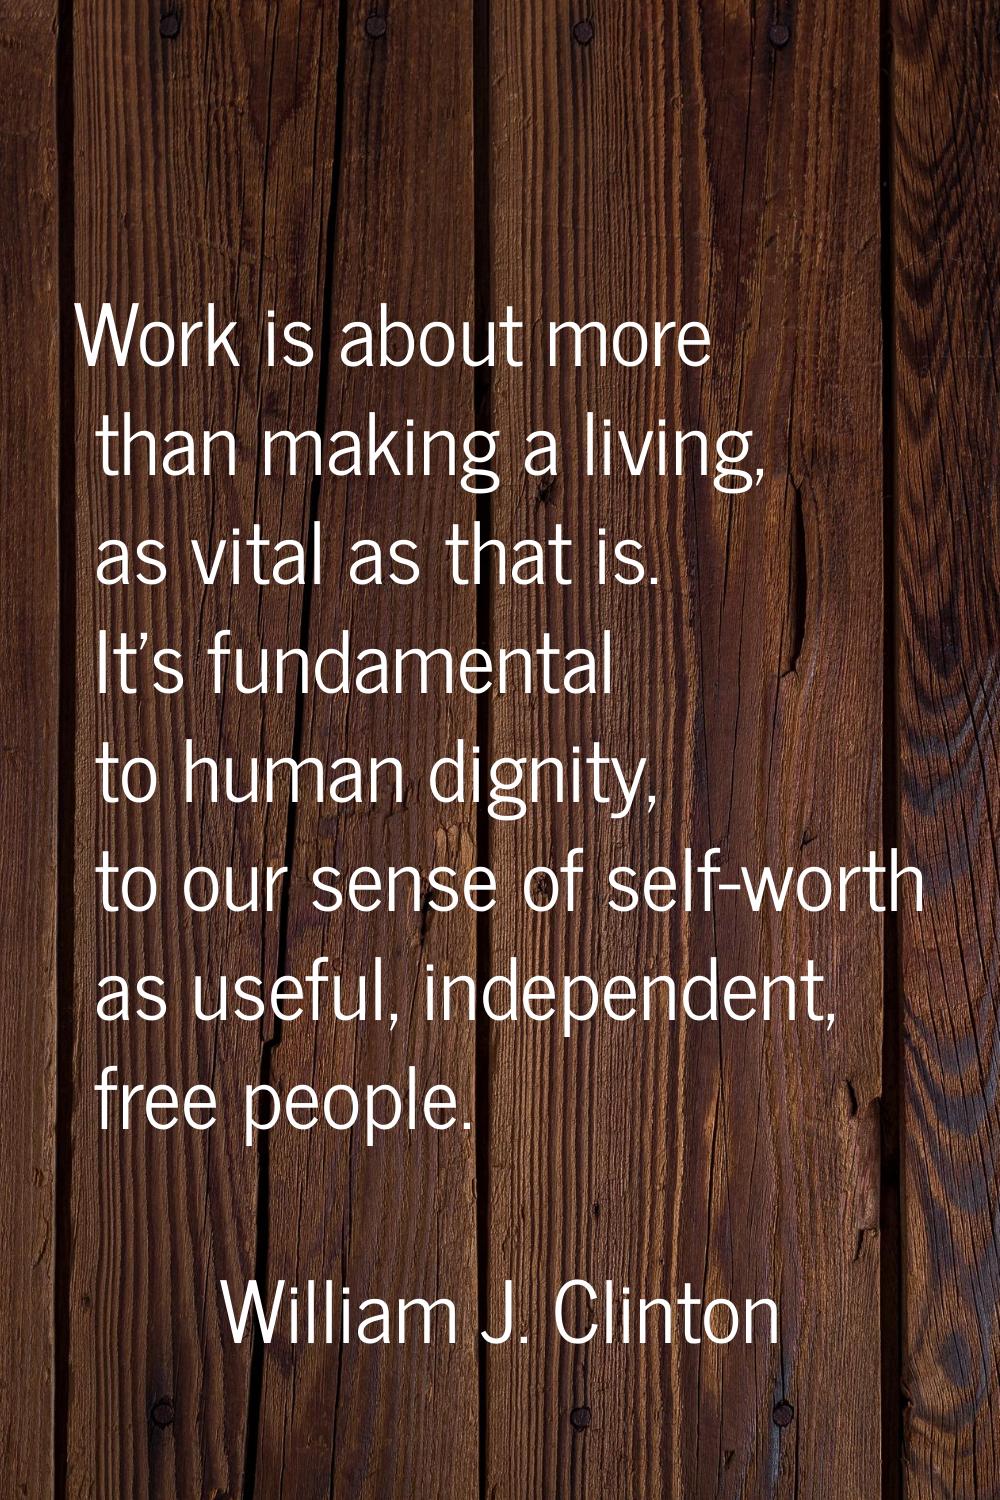 Work is about more than making a living, as vital as that is. It's fundamental to human dignity, to